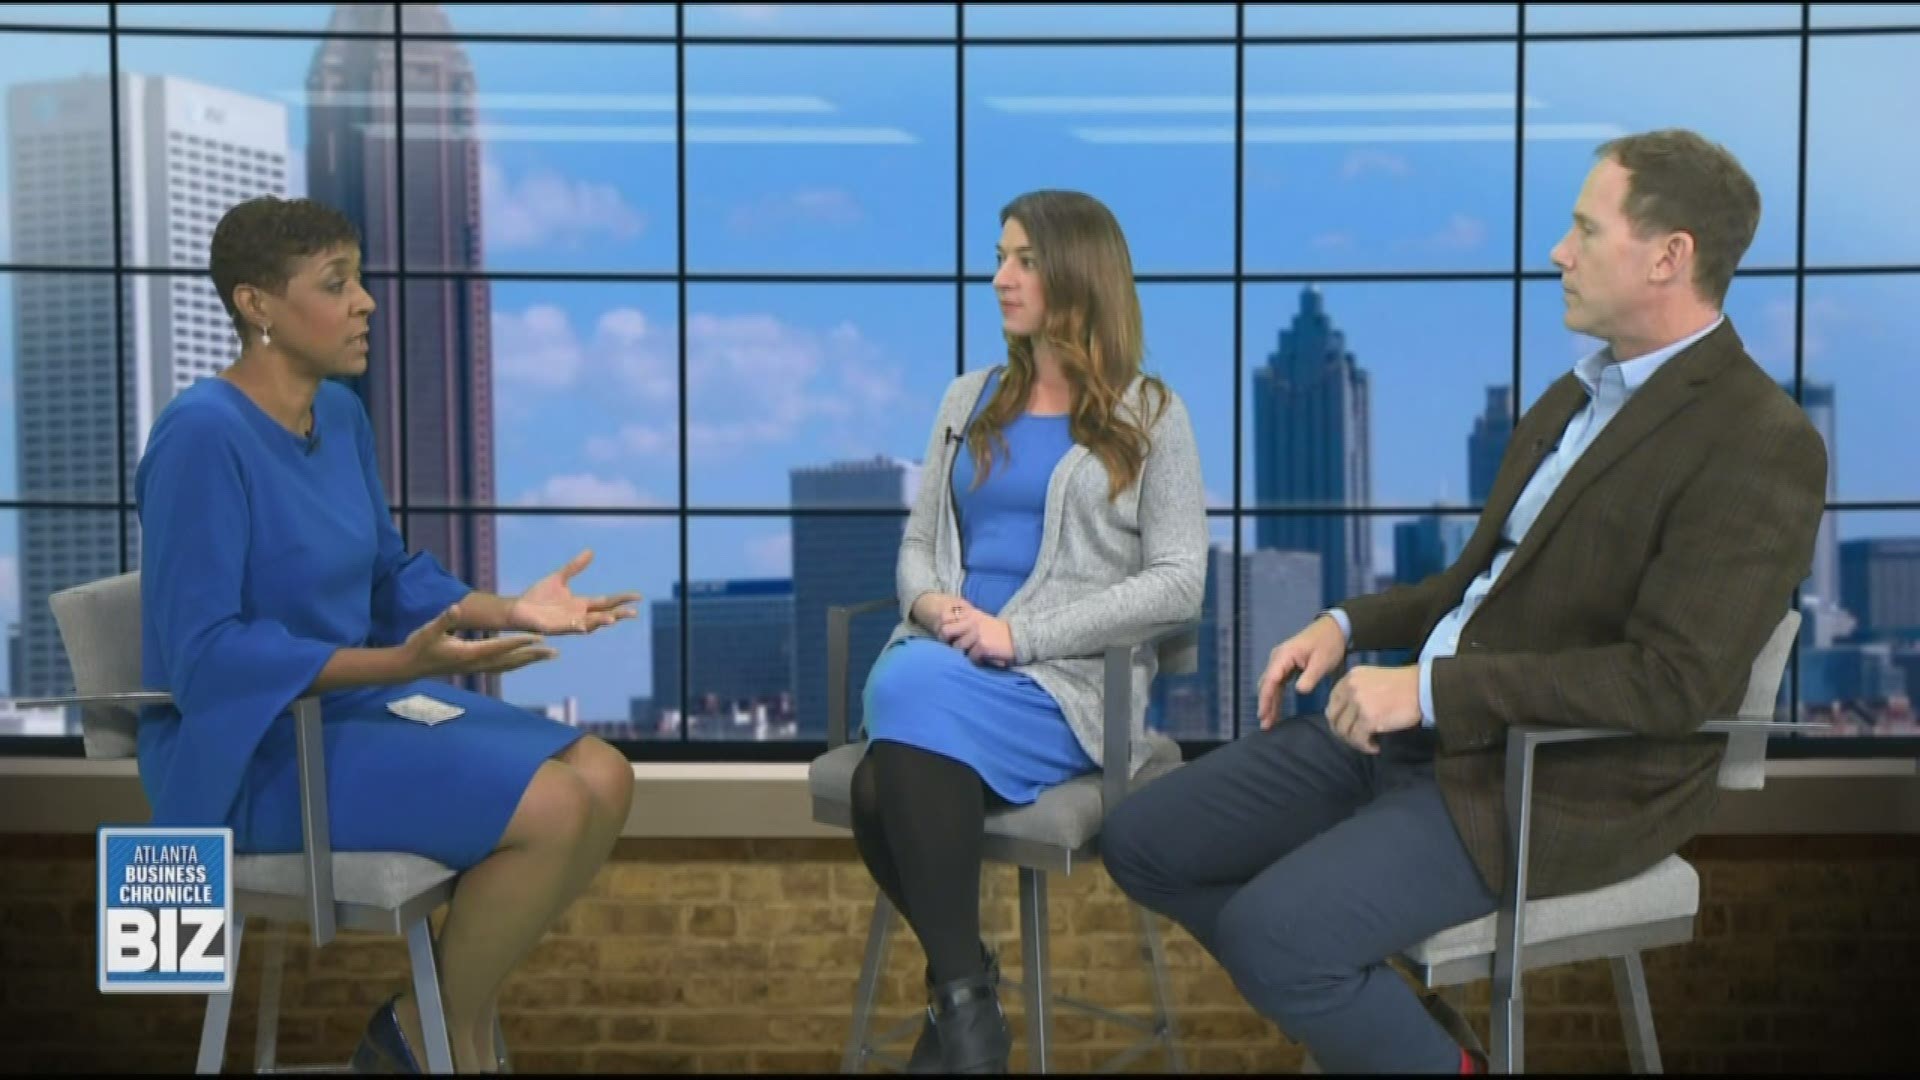 Atlanta Business Chronicle reporters Doug Sams and Amy Wenk talk about commercial real estate trends on BIZ with Crystal Edmonson.